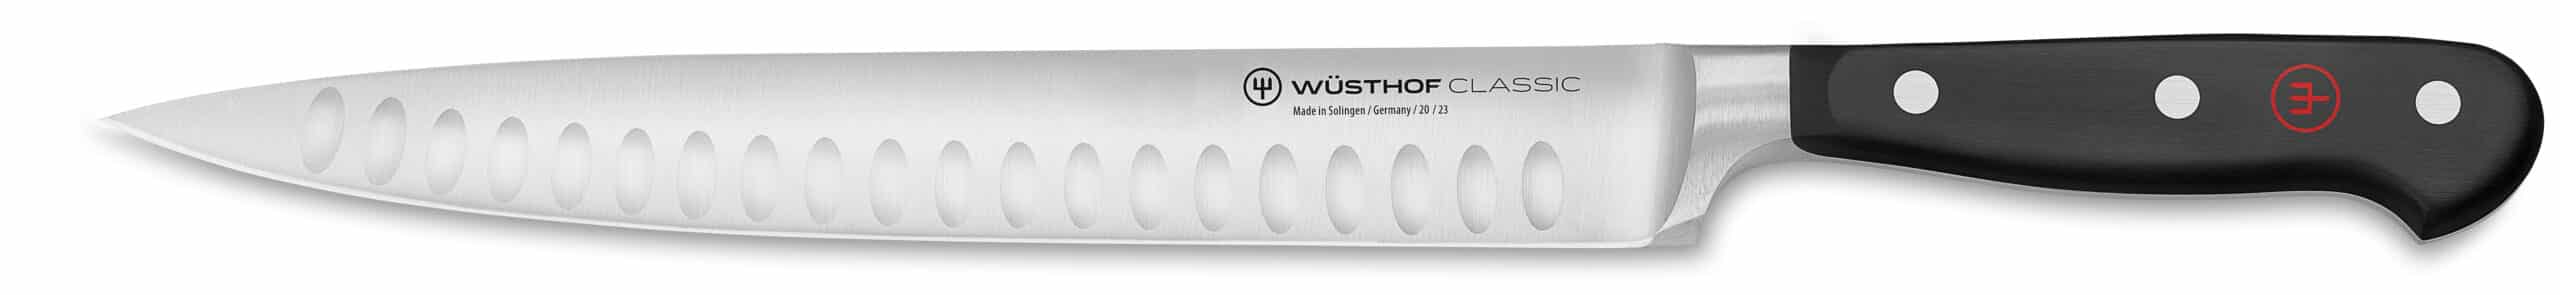 Wusthof Classic Carving Knife Hollow Edge 23cm